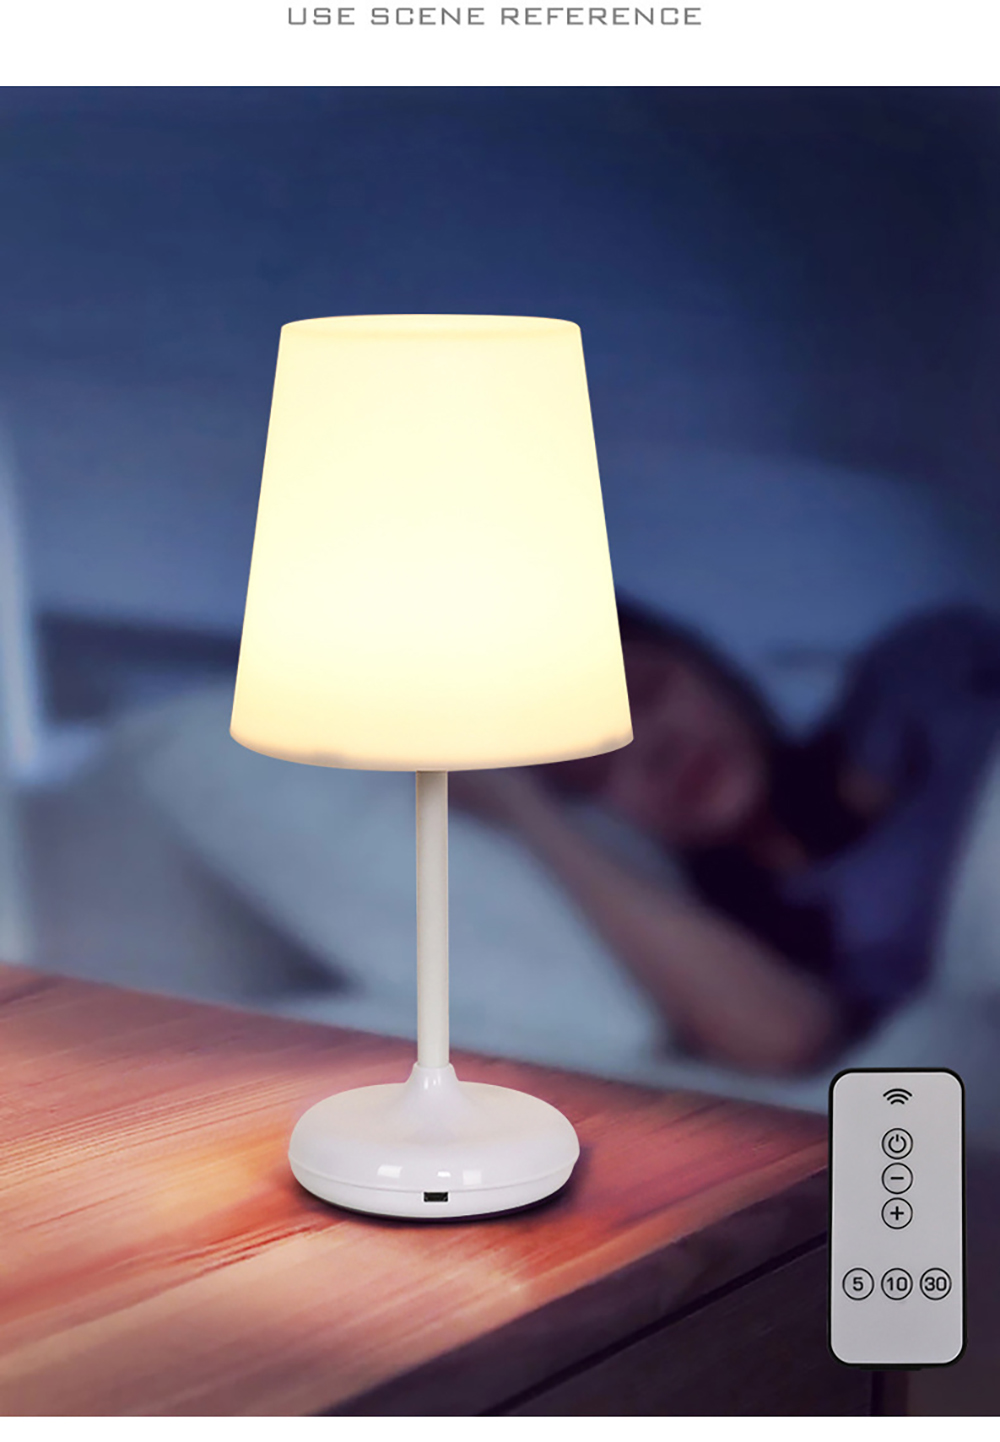 Table Lamp with Remote Control USB Charging Reading Desk Light Touch Dimmable Bedside Lamp Desk Lamps for Home Office Bedroom Study Room Hotel